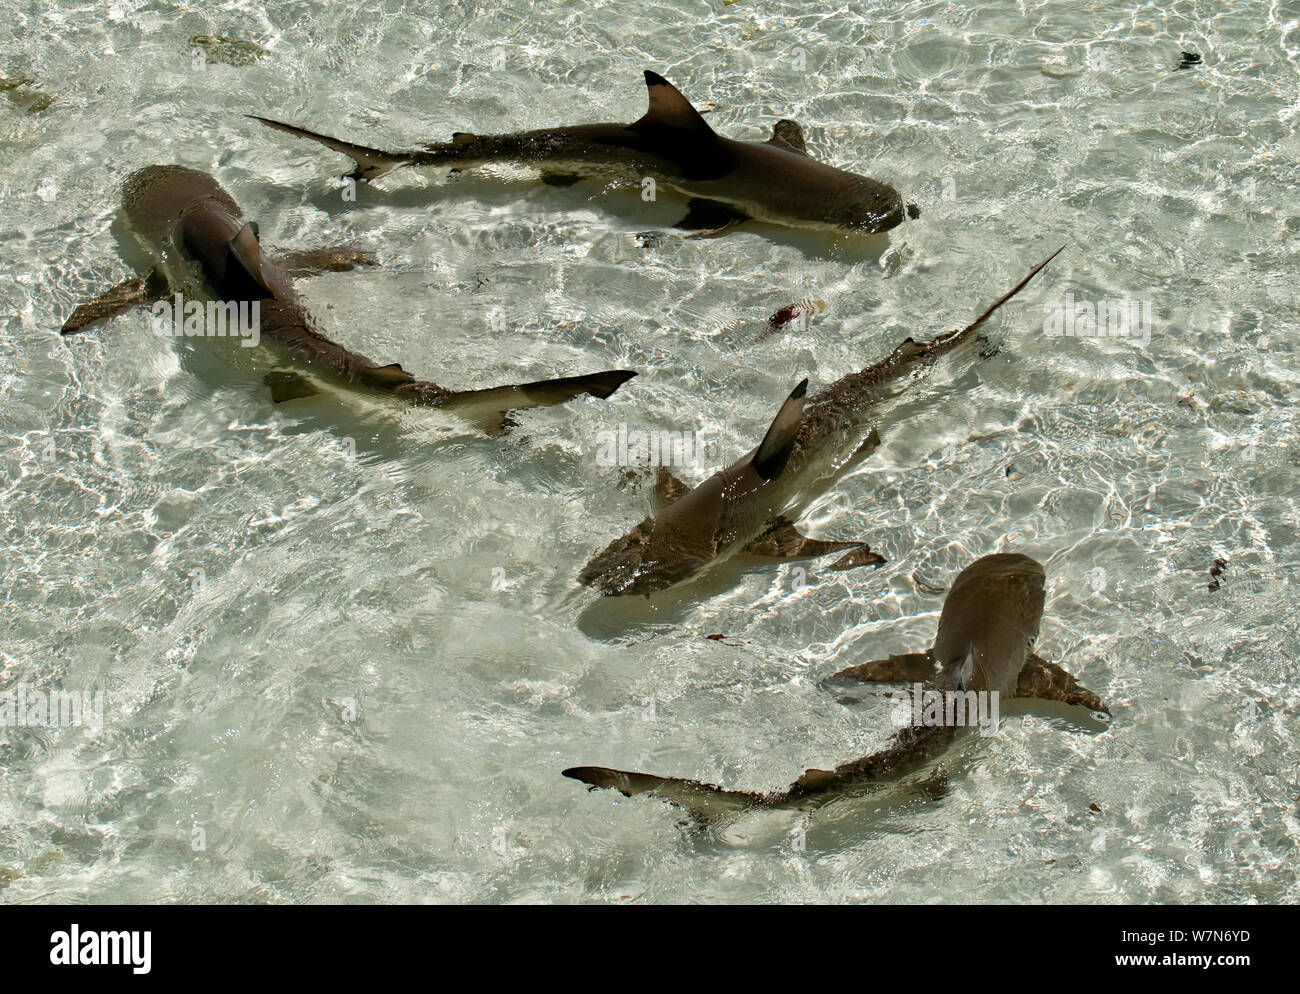 Blacktip reef sharks (Carcharhinus melanopterus) swimming in shallow crystal clear water, Aldabra Atoll, Seychelles, Indian Ocean Stock Photo